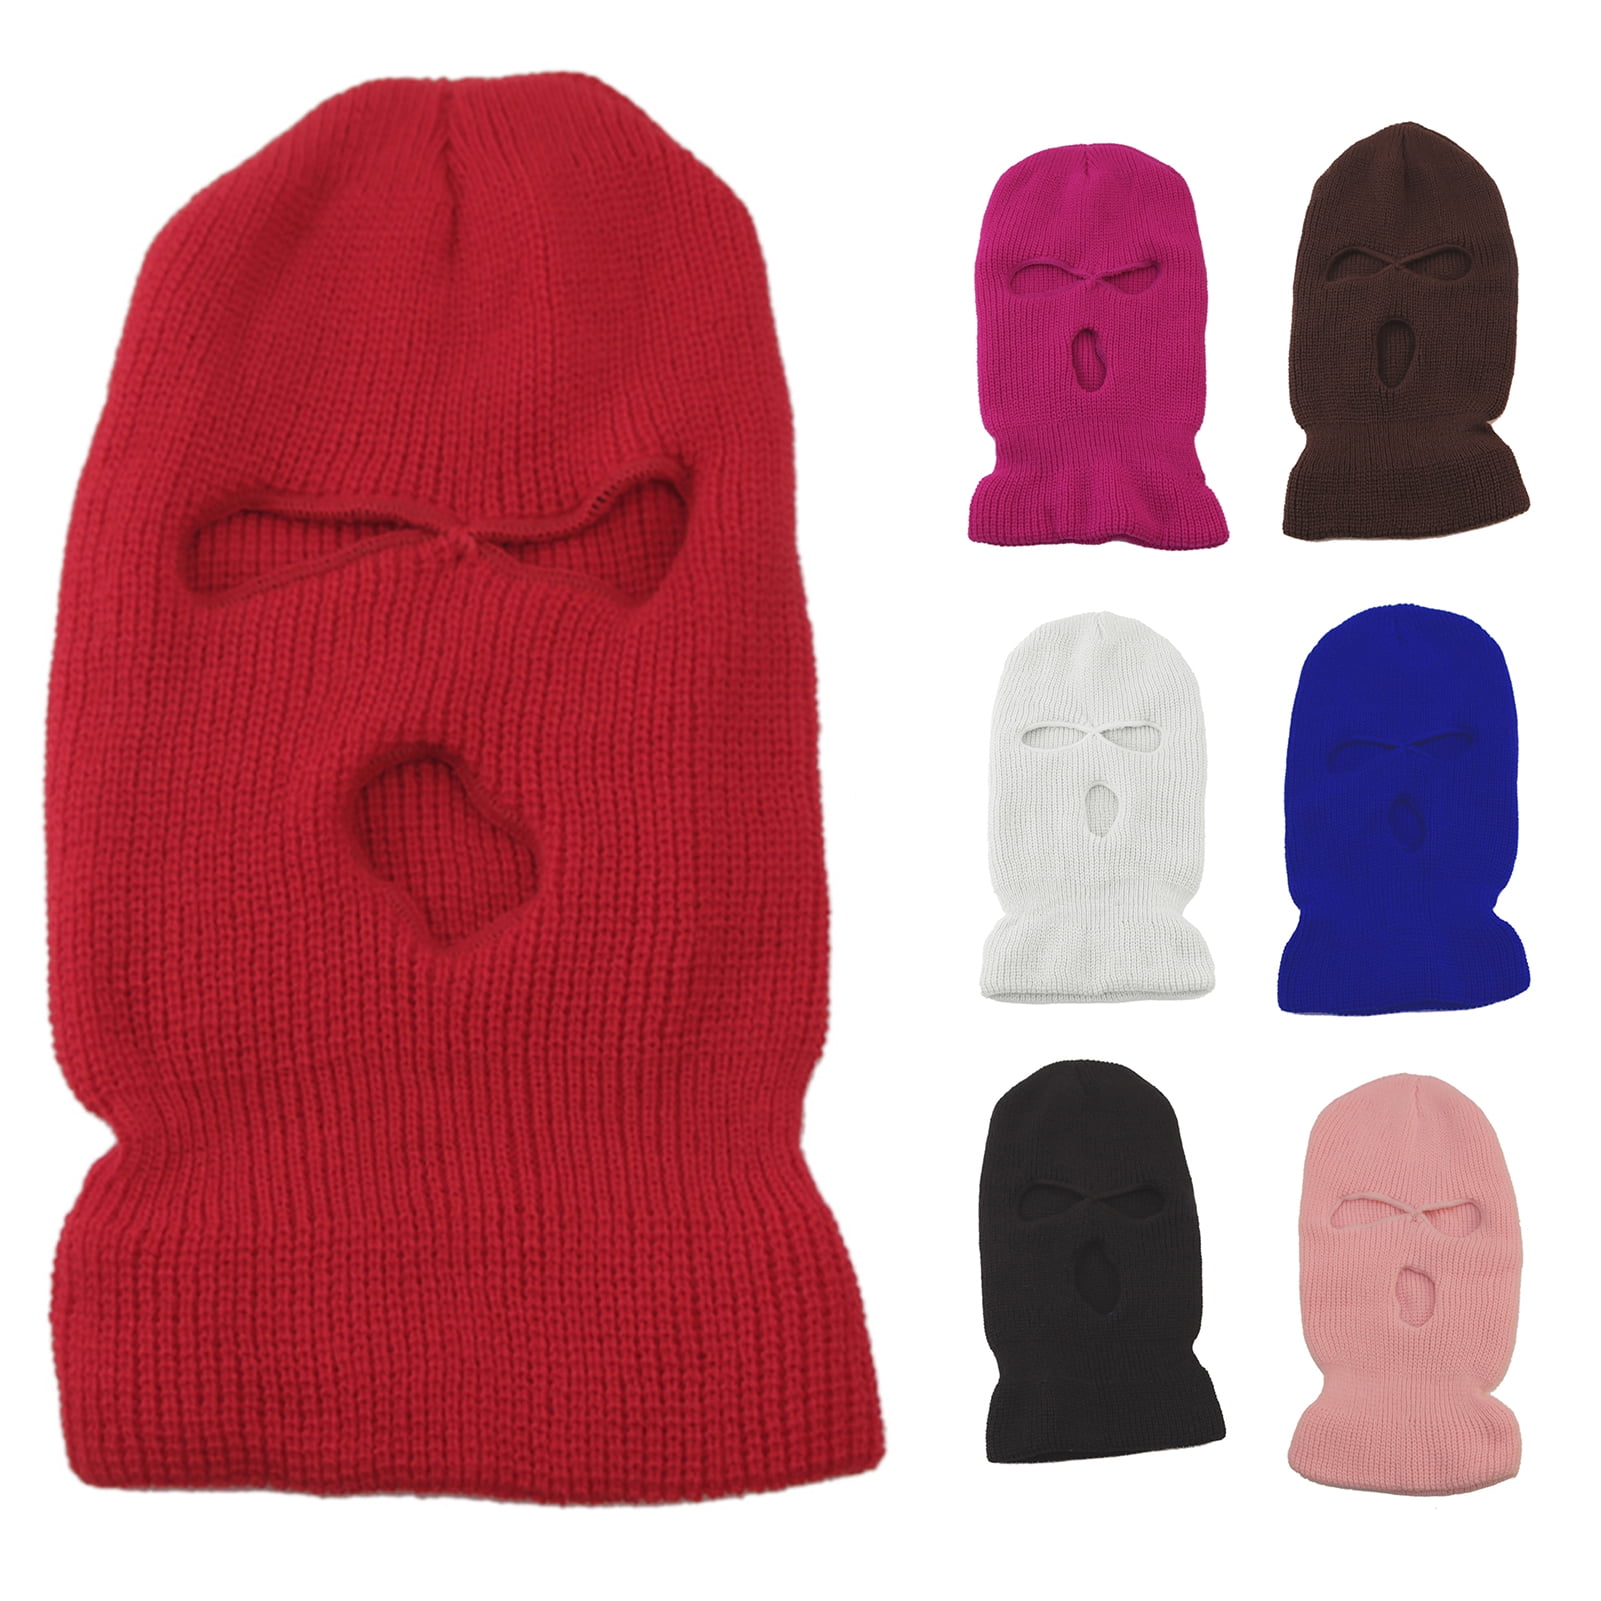 3 Hole Knitted Face Cover Men Winter Balaclava Women's Ski Mask for ...